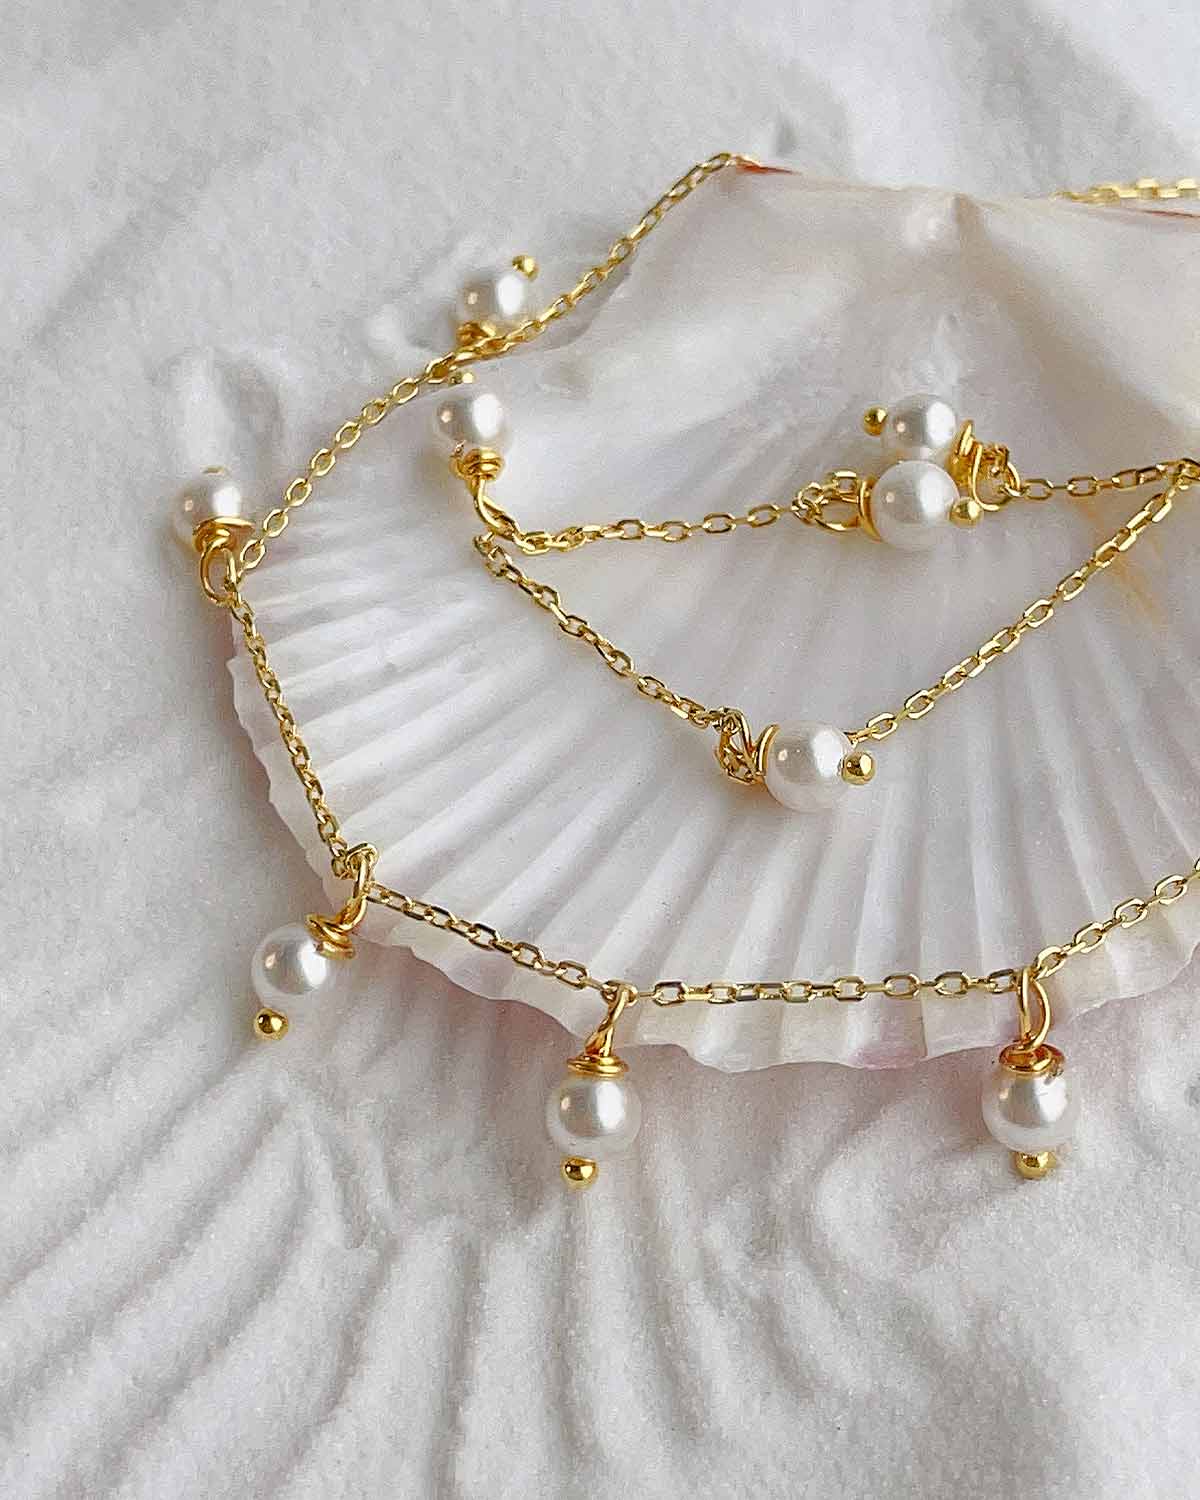 S925 Dainty Dangling Pearl Necklace